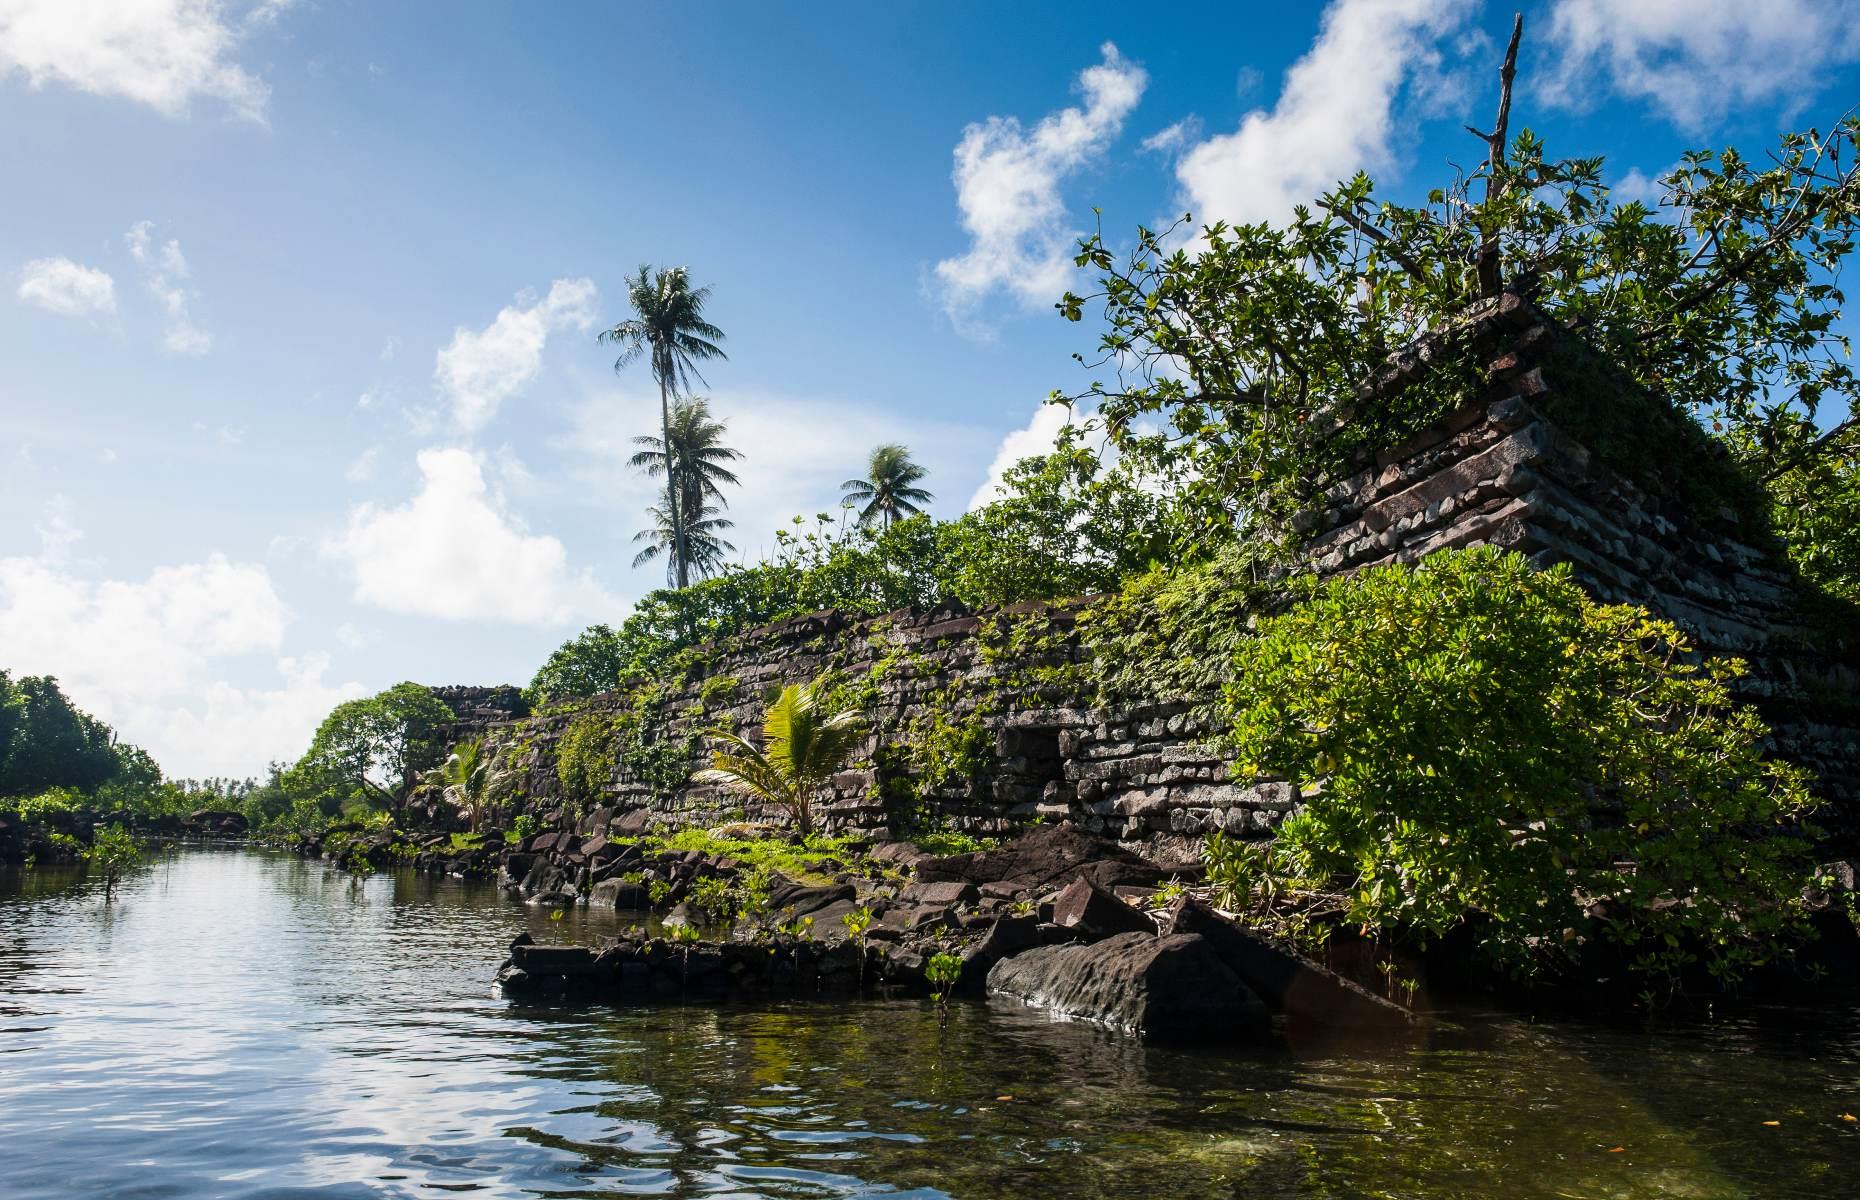 <p>A hidden gem of the Pacific, Nan Madol is a series of over 100 ancient man-made islets off the coast of Pohnpei in Micronesia. Built between AD 1200 and 1500, the ancient city was built on a coral reef, its islands dotted with the ruins of palaces, temples, tombs and houses. The city has recently made the UNESCO Danger list due to the uncontrolled plantlife in its waterways that threaten its ruins. With its spectacular architecture and incredible canals, it is one of the most intriguing ancient cities in the world. Discover <a href="https://www.loveexploring.com/gallerylist/99015/incredible-ancient-ruins-rebuilt-before-your-eyes">incredible ancient ruins rebuilt before your eyes here</a>. </p>